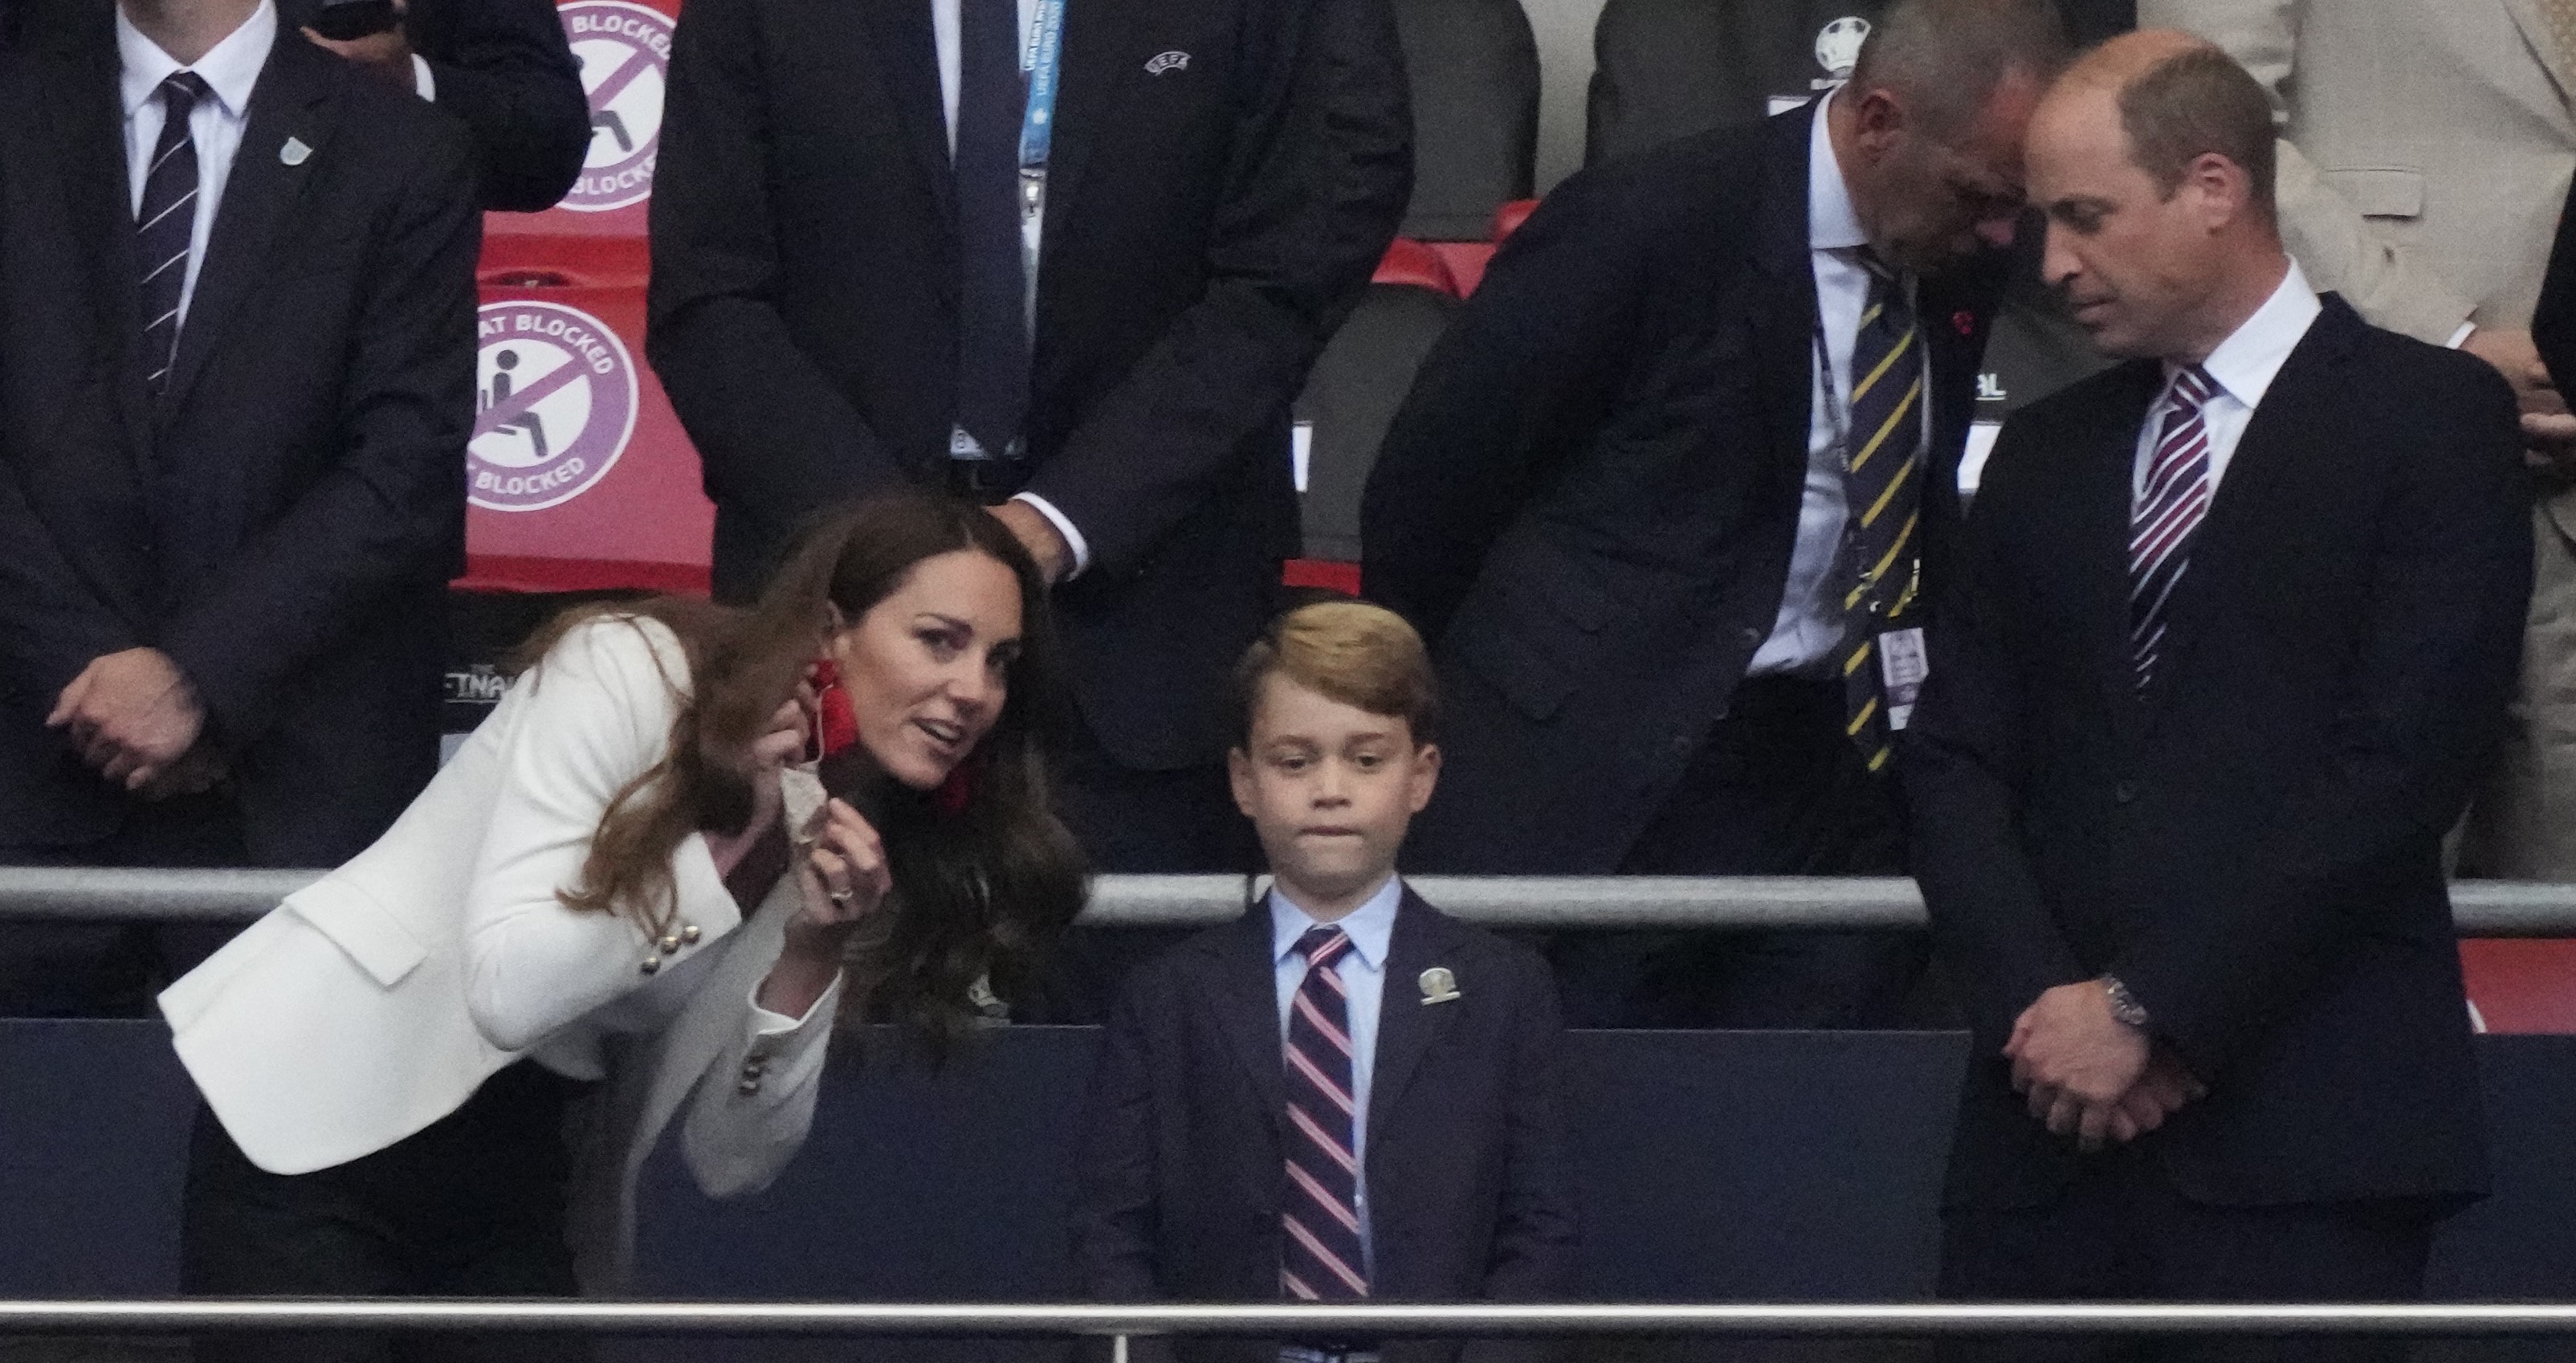 Kate Middeton with Prince George and Prince William looking on during the UEFA EURO 2020 final football match